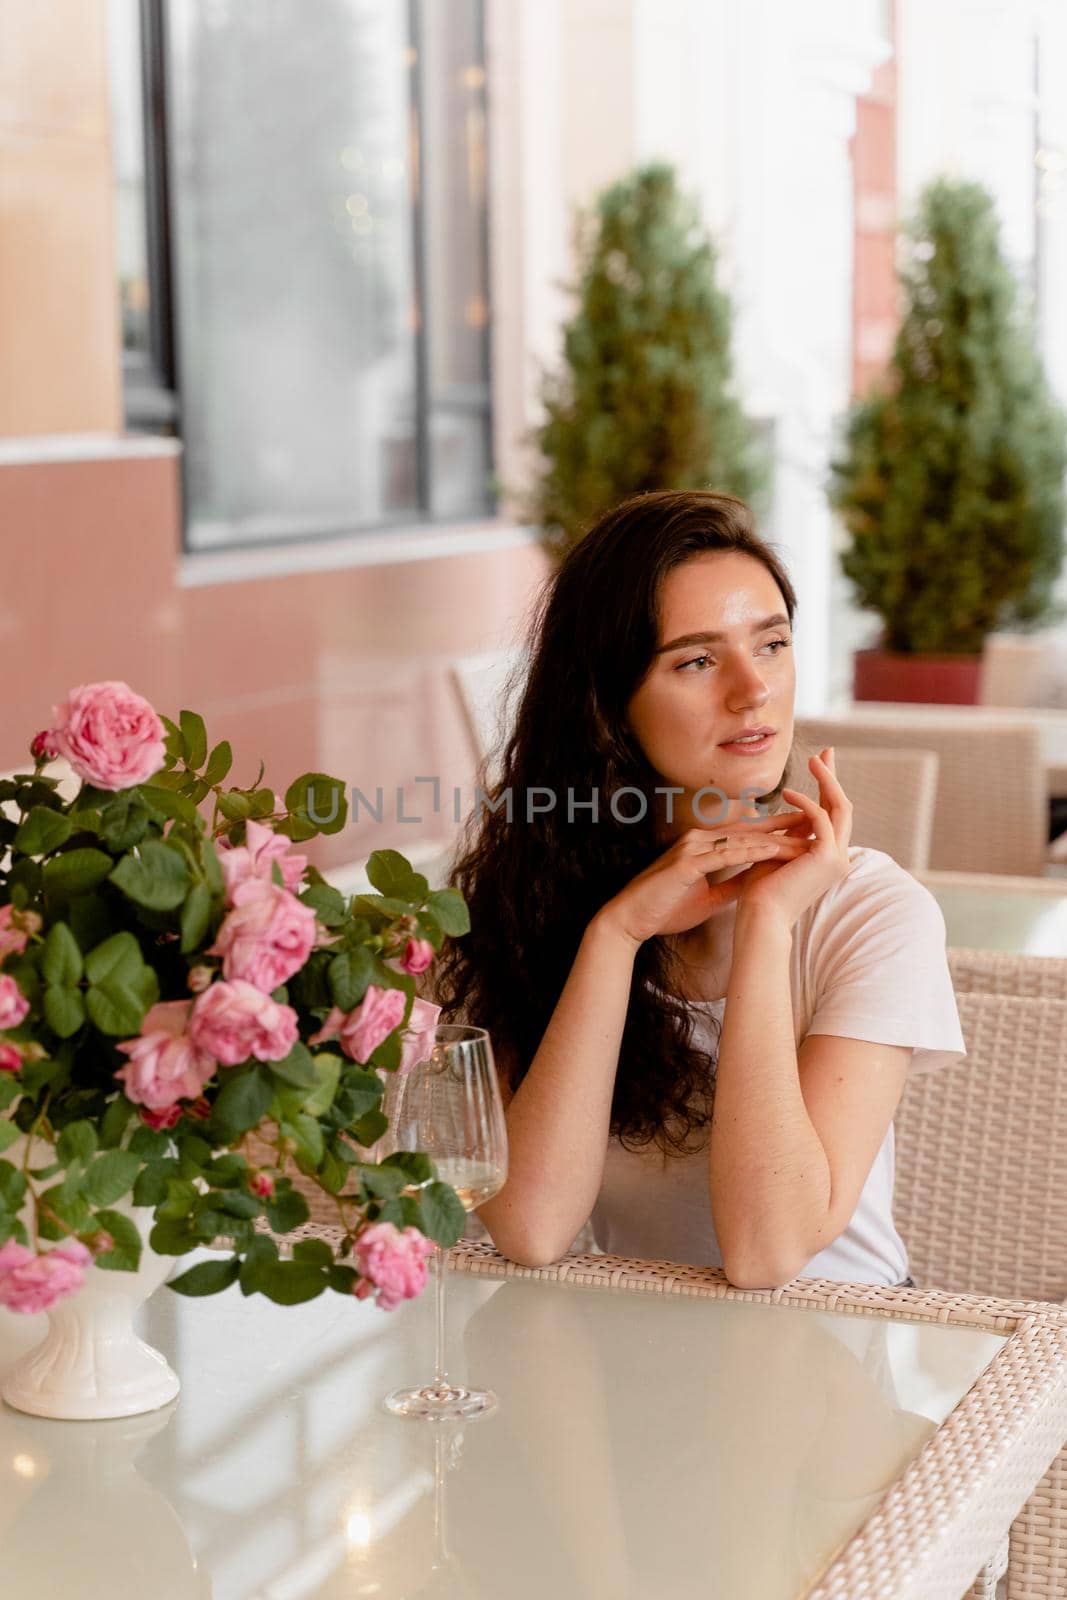 Dreaming woman with glass of alcoholic white wine in cafe in summer terrace and bouquet of roses on the table.